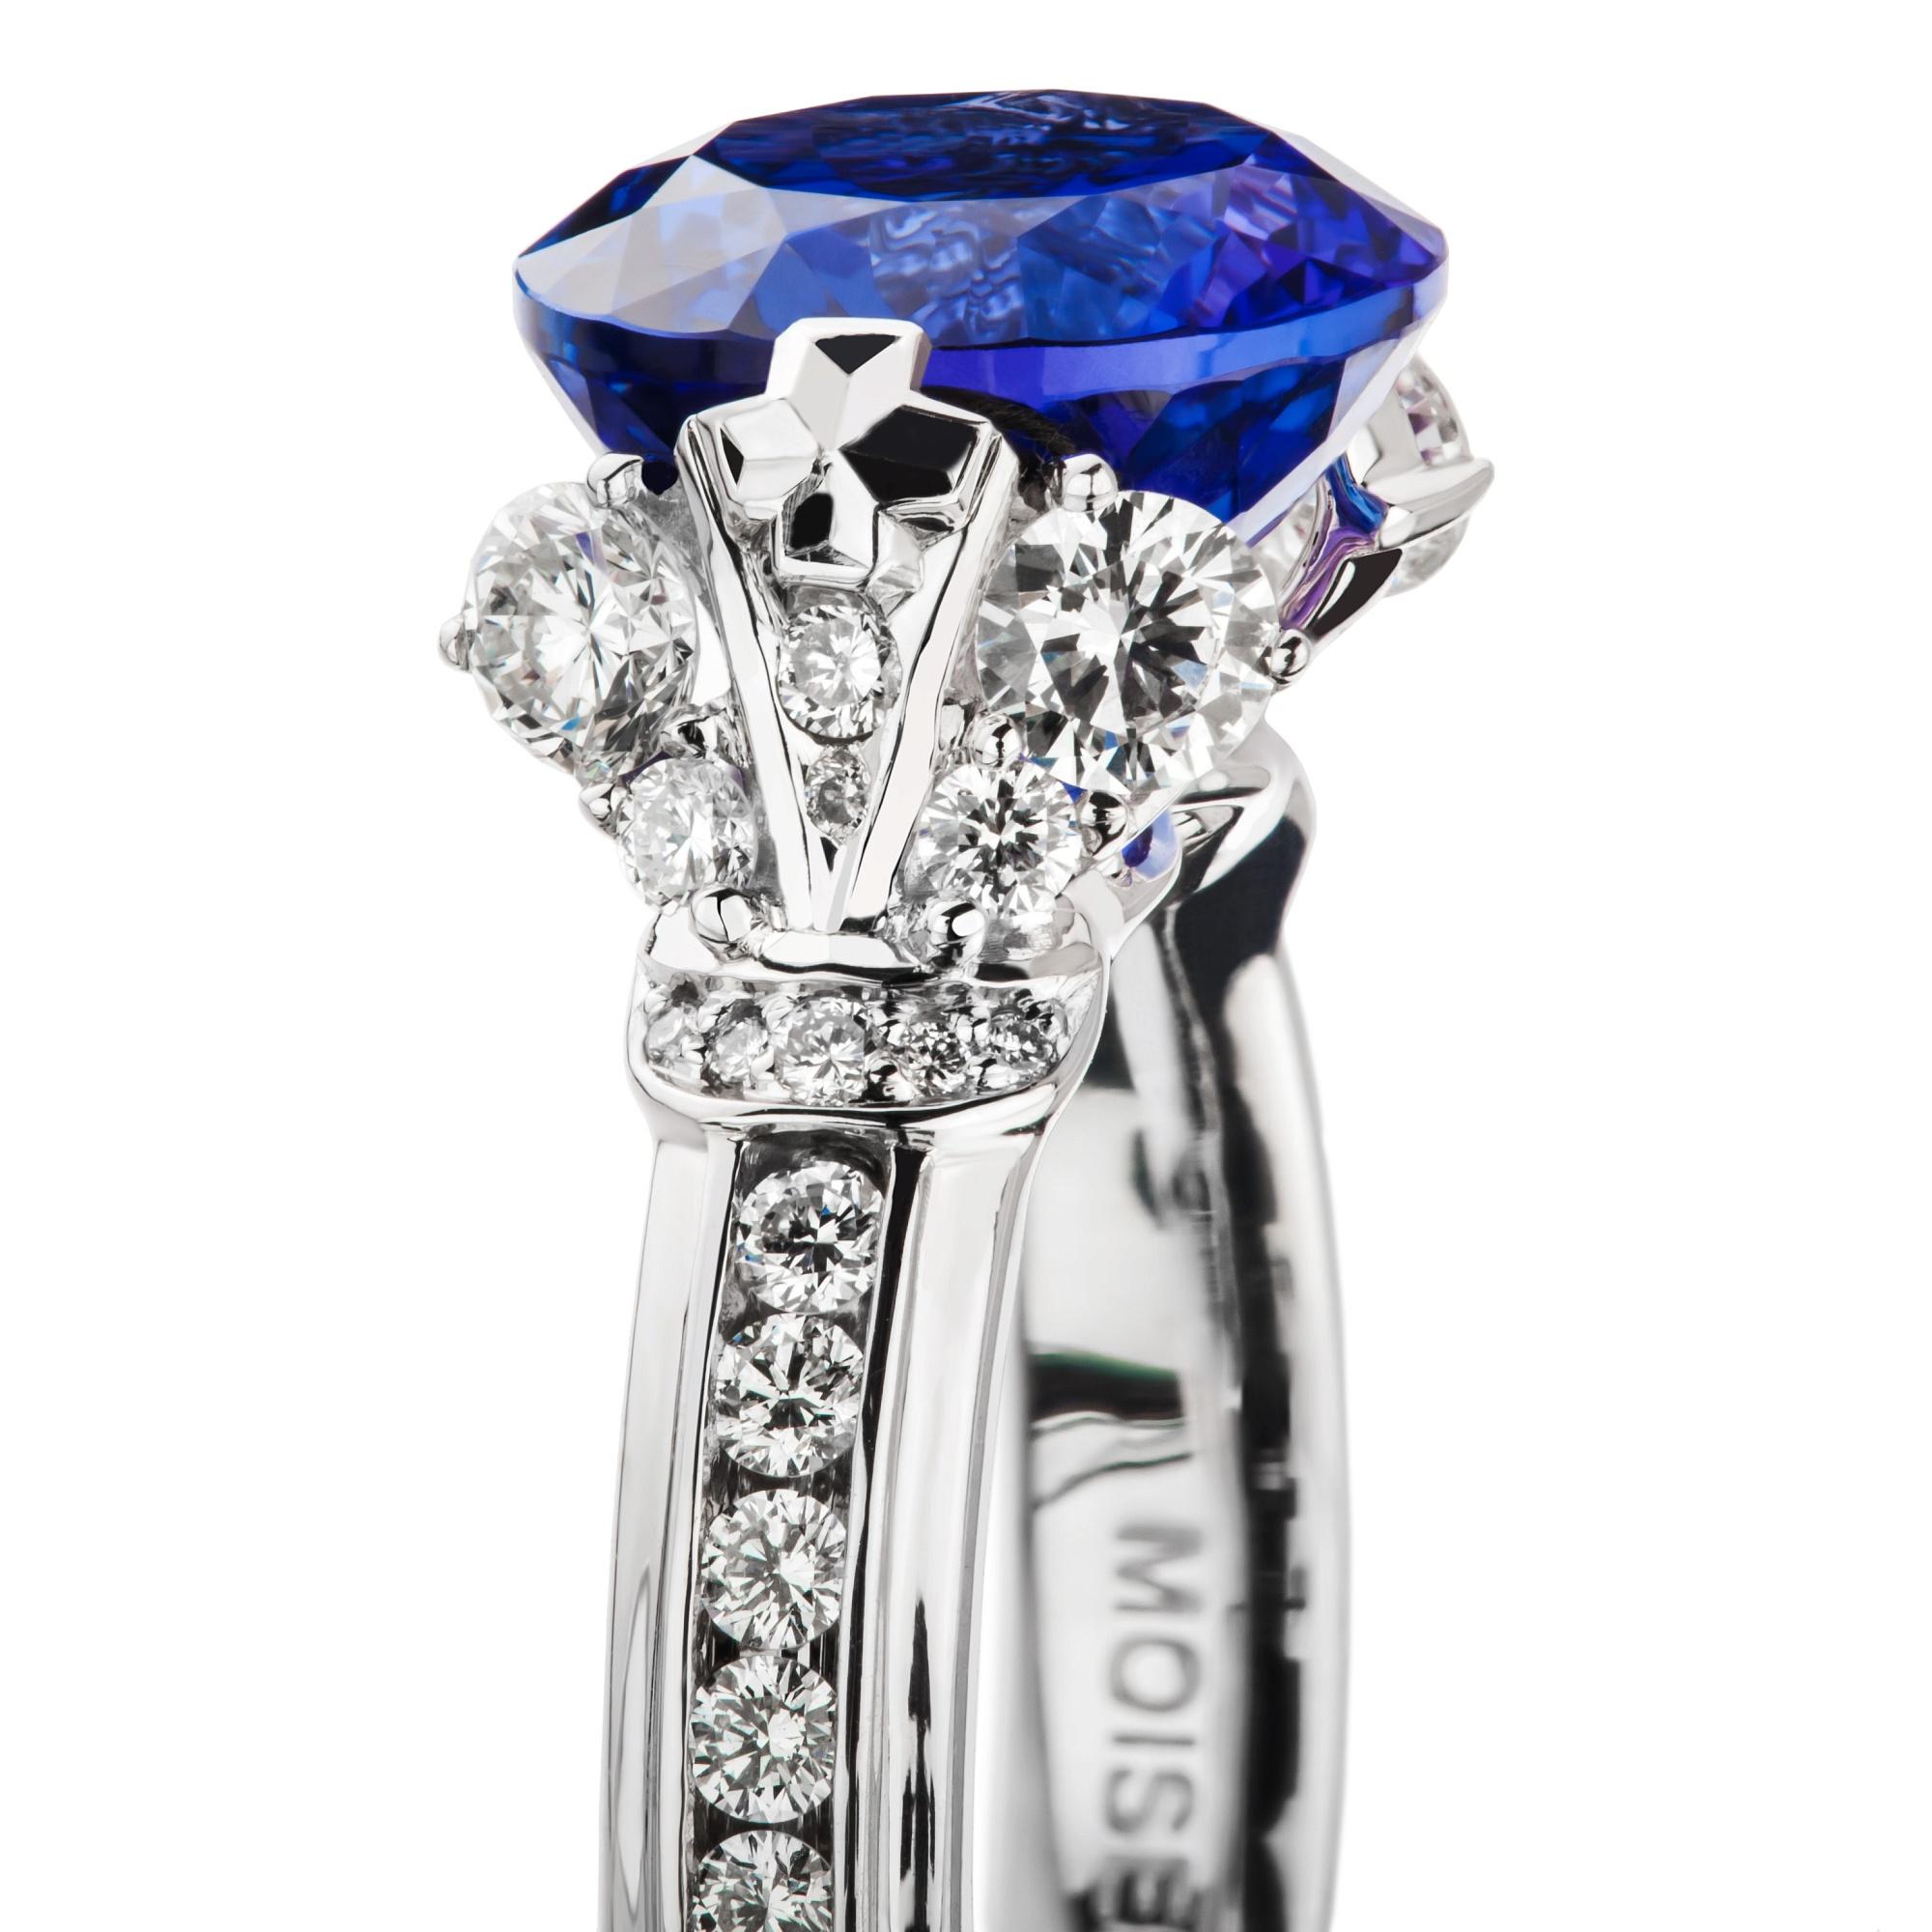 Elegant and classic -  the ring made of diamonds and a vivid 5ct tanzanite, is inspired by the splendid period of Russian and Europe. Dedicated for the Imperial greatness, luxury, beauty, and noble aspiration, the crown shaped earrings from this “